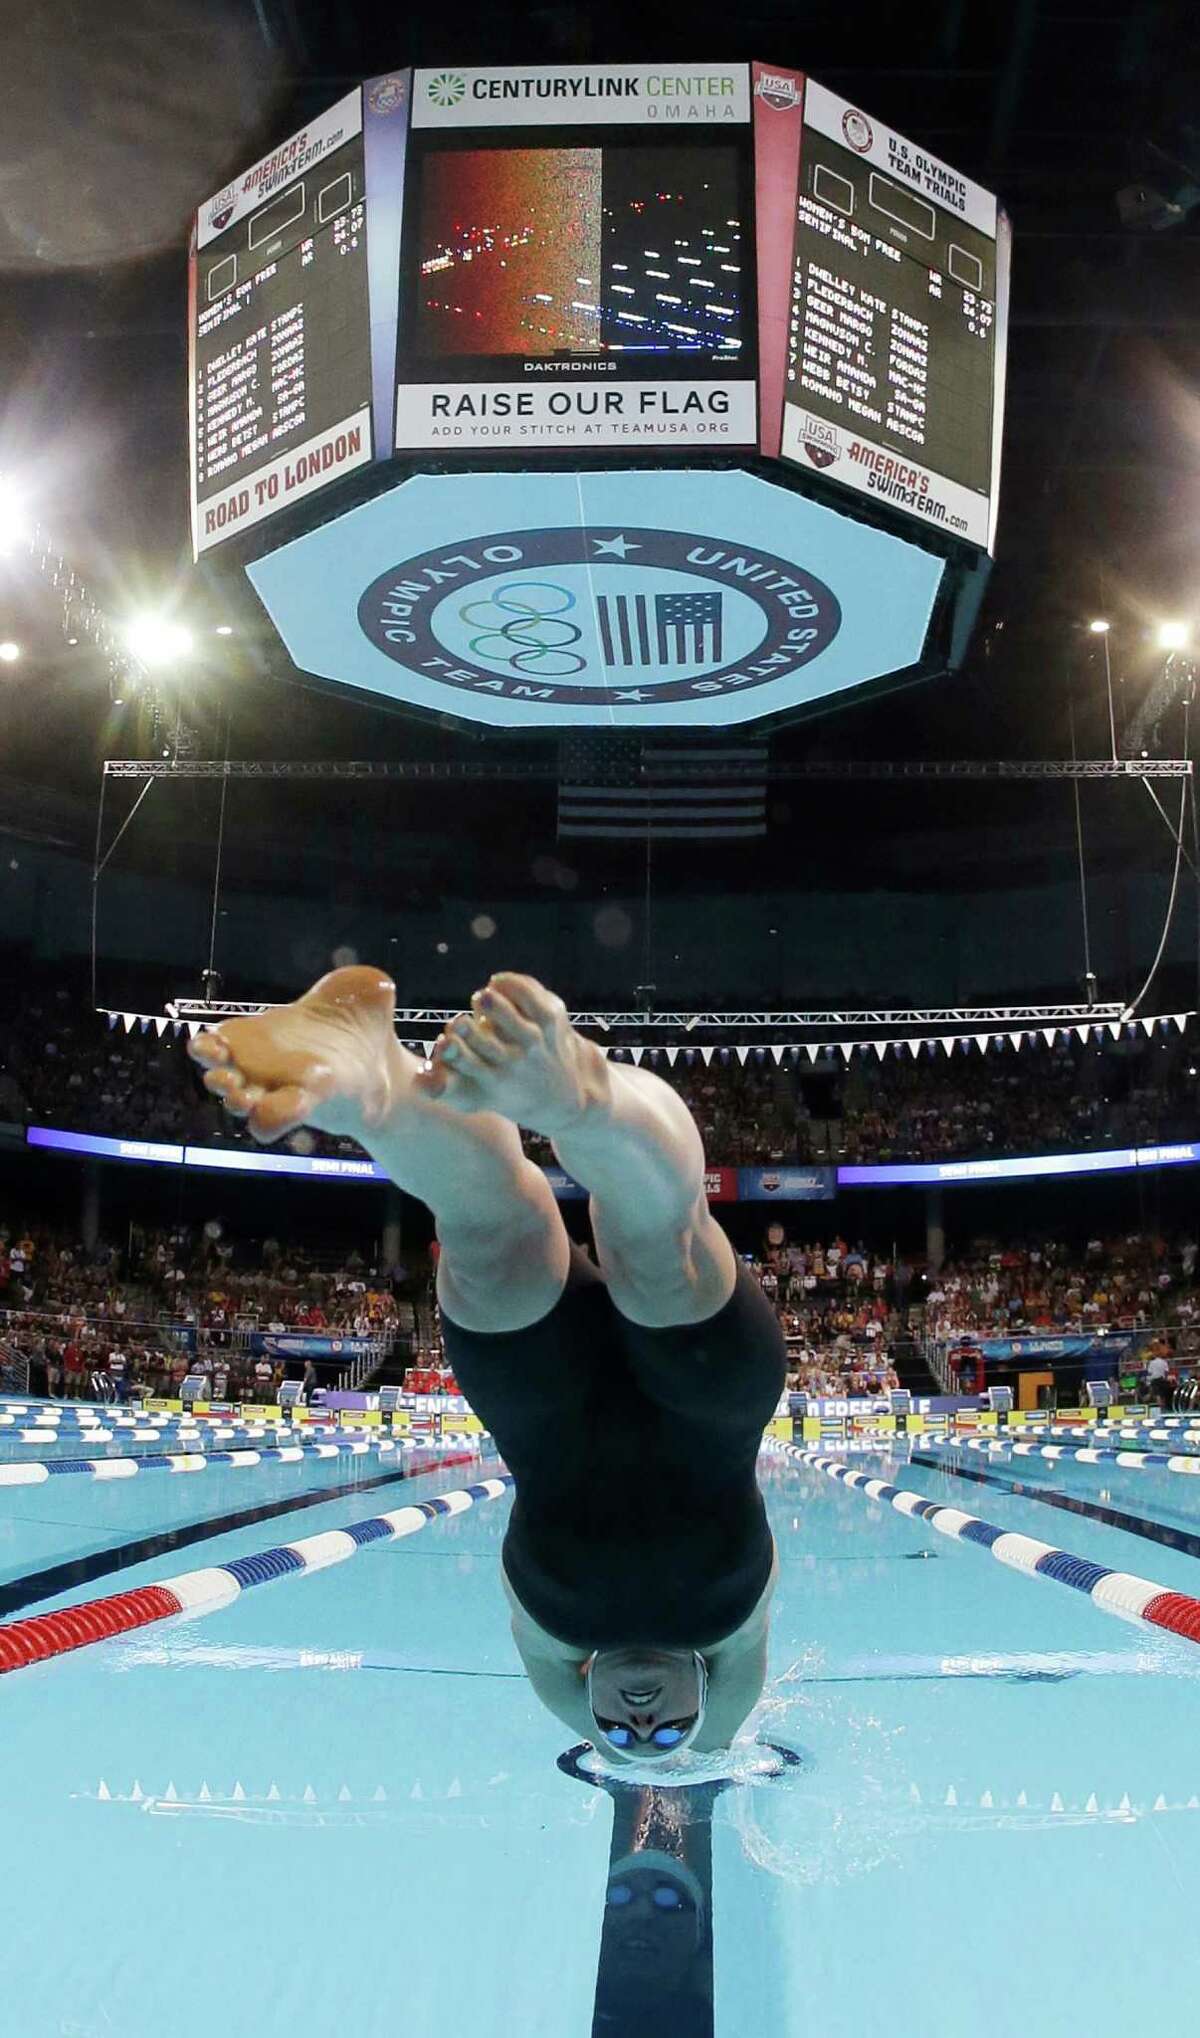 Madison Kennedy dives at the start of the women's 50-meter freestyle semifinal at the U.S. Olympic swimming trials on Sunday, July 1, 2012, in Omaha, Neb. (AP Photo/Mark Humphrey)